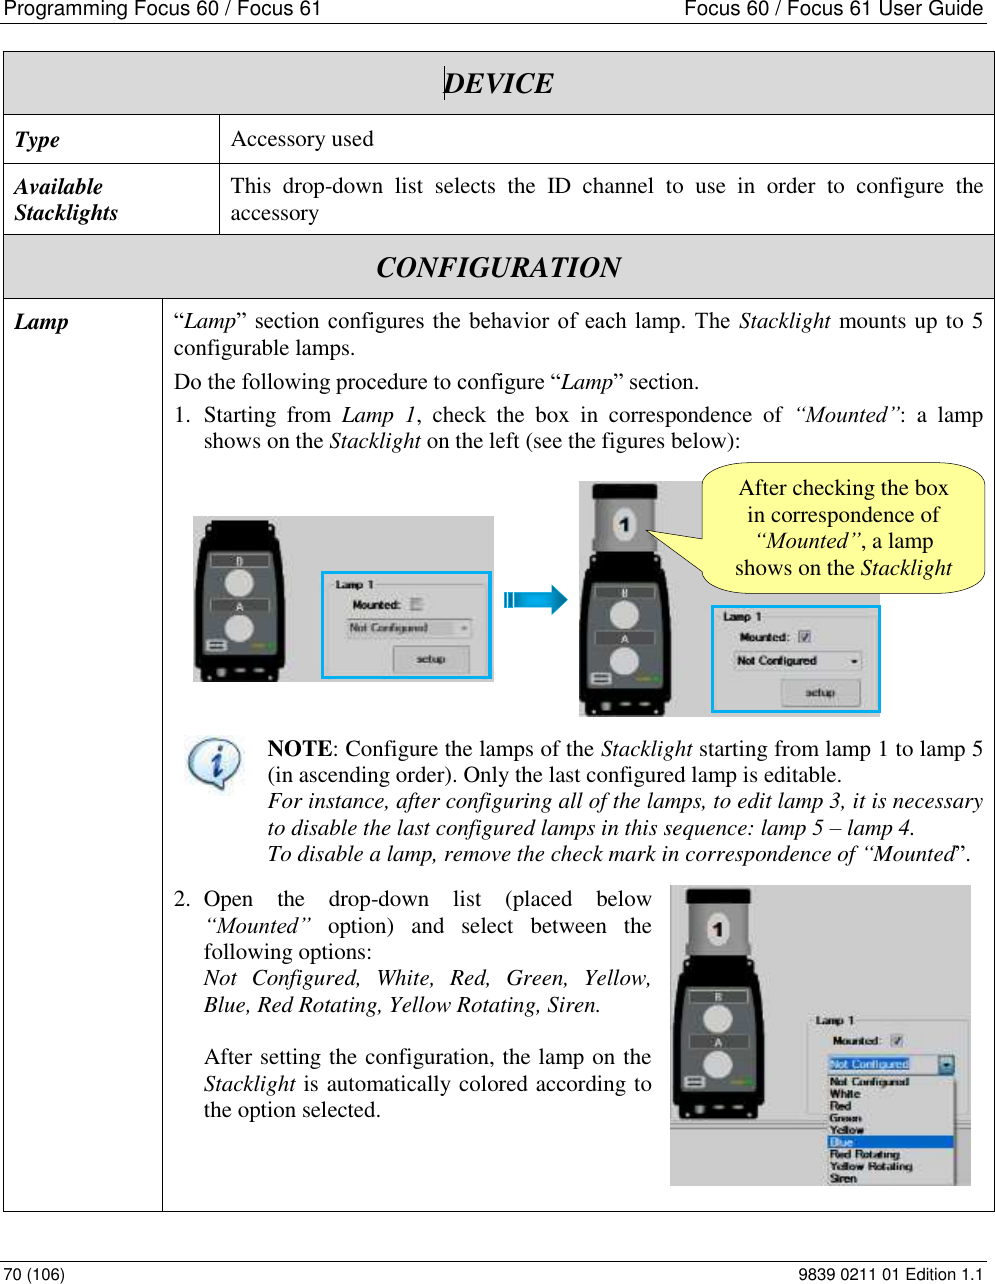 Programming Focus 60 / Focus 61  Focus 60 / Focus 61 User Guide 70 (106)  9839 0211 01 Edition 1.1  DEVICE Type Accessory used Available Stacklights This  drop-down  list  selects  the  ID  channel  to  use  in  order  to  configure  the accessory CONFIGURATION Lamp “Lamp” section configures the behavior  of each lamp. The  Stacklight mounts up to 5 configurable lamps. Do the following procedure to configure “Lamp” section. 1. Starting  from  Lamp  1,  check  the  box  in  correspondence  of  “Mounted”:  a  lamp shows on the Stacklight on the left (see the figures below):  NOTE: Configure the lamps of the Stacklight starting from lamp 1 to lamp 5 (in ascending order). Only the last configured lamp is editable. For instance, after configuring all of the lamps, to edit lamp 3, it is necessary to disable the last configured lamps in this sequence: lamp 5 – lamp 4. To disable a lamp, remove the check mark in correspondence of “Mounted”. 2. Open  the  drop-down  list  (placed  below “Mounted”  option)  and  select  between  the following options: Not  Configured,  White,  Red,  Green,  Yellow, Blue, Red Rotating, Yellow Rotating, Siren.  After setting the configuration, the lamp on the Stacklight is automatically colored according to the option selected.     After checking the box in correspondence of “Mounted”, a lamp shows on the Stacklight 